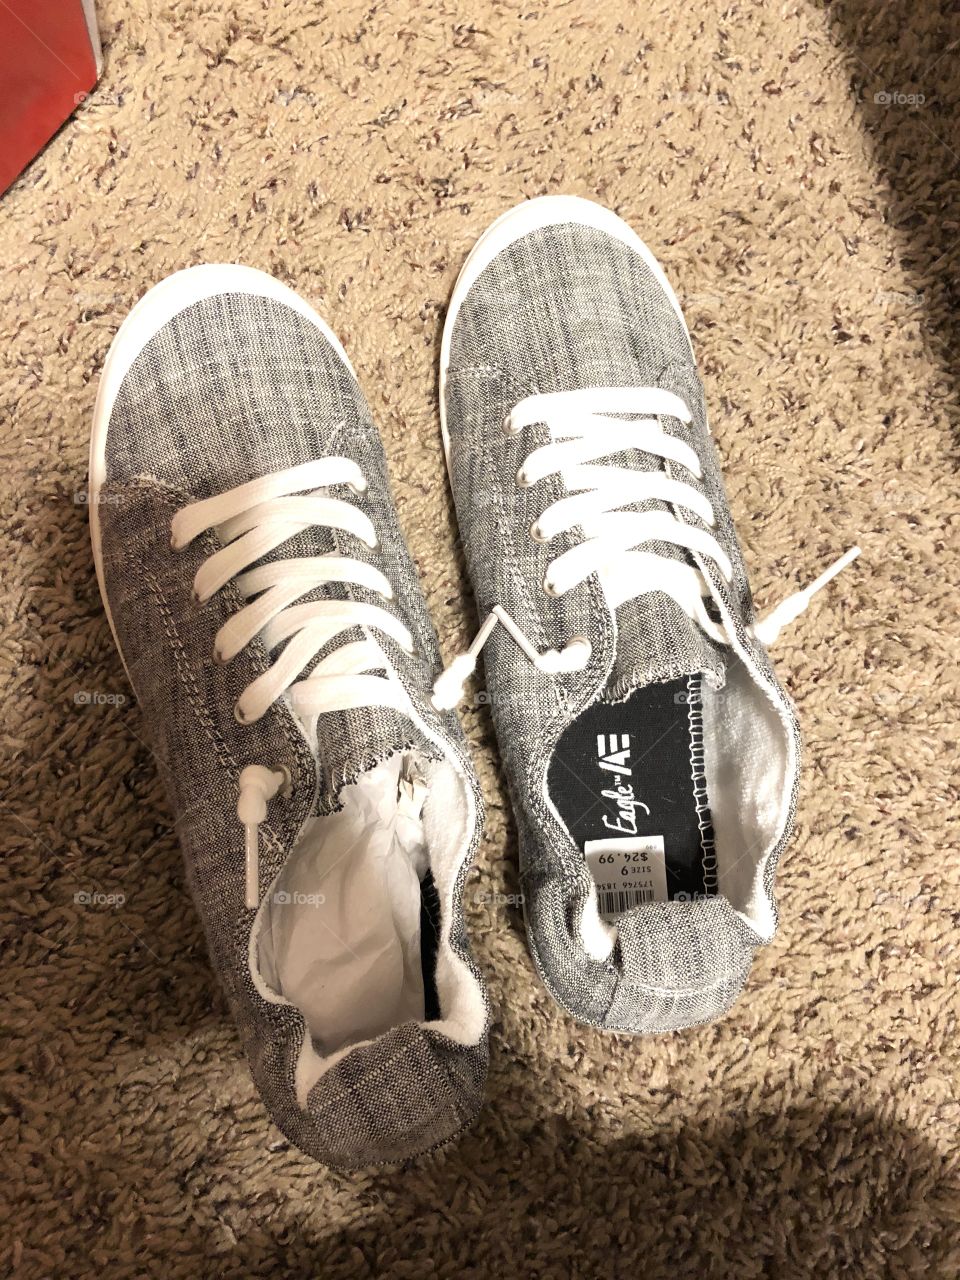 American eagle shoes brand new, bright white and fresh clean smell! I’m loving these shoes! 